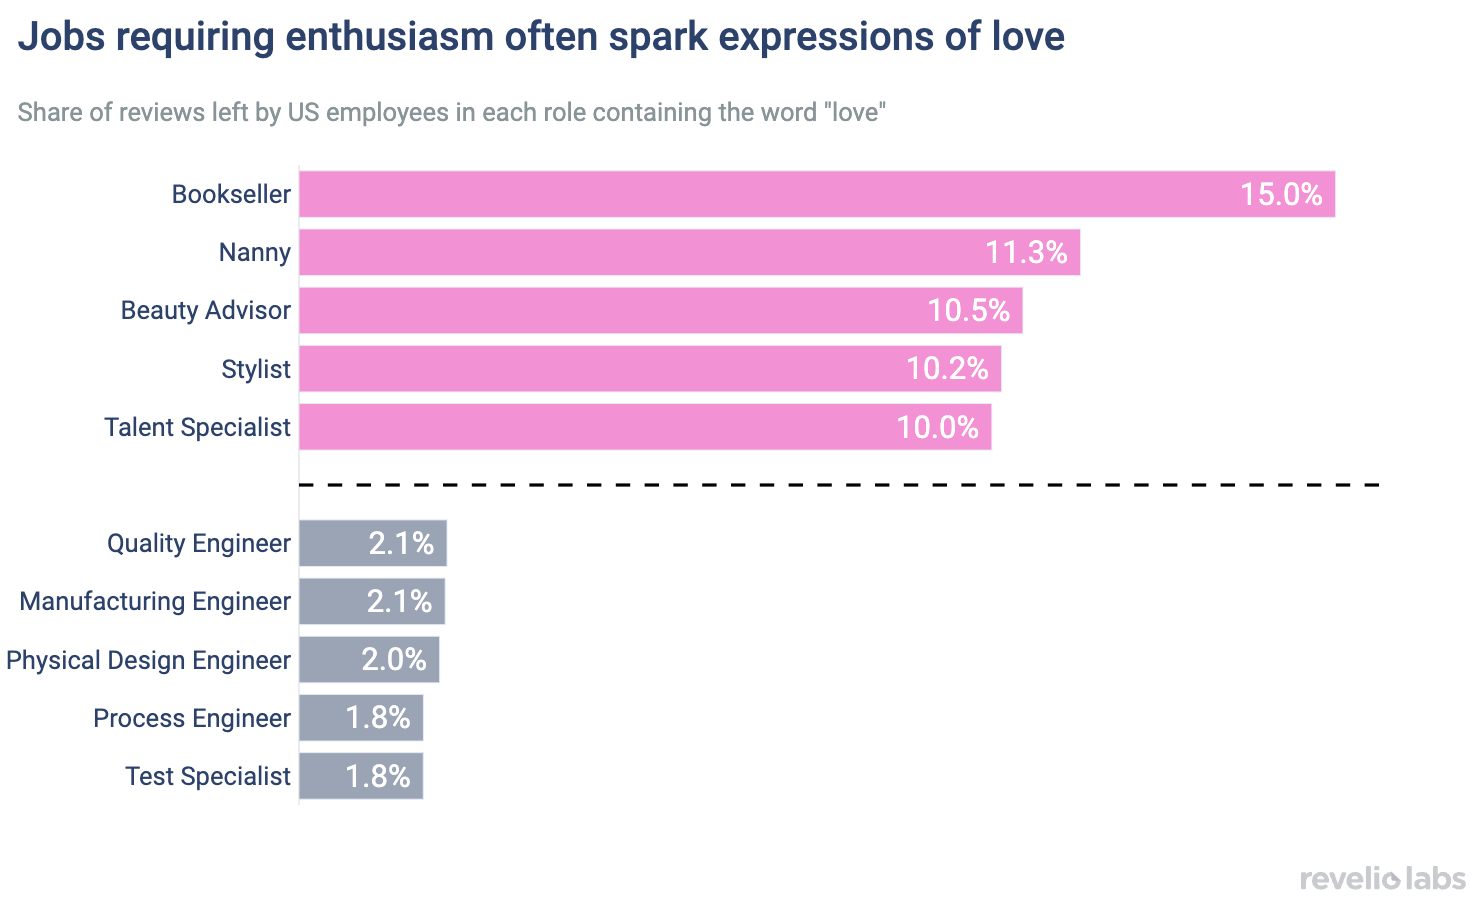 Jobs requiring enthusiasm often spark expressions of love